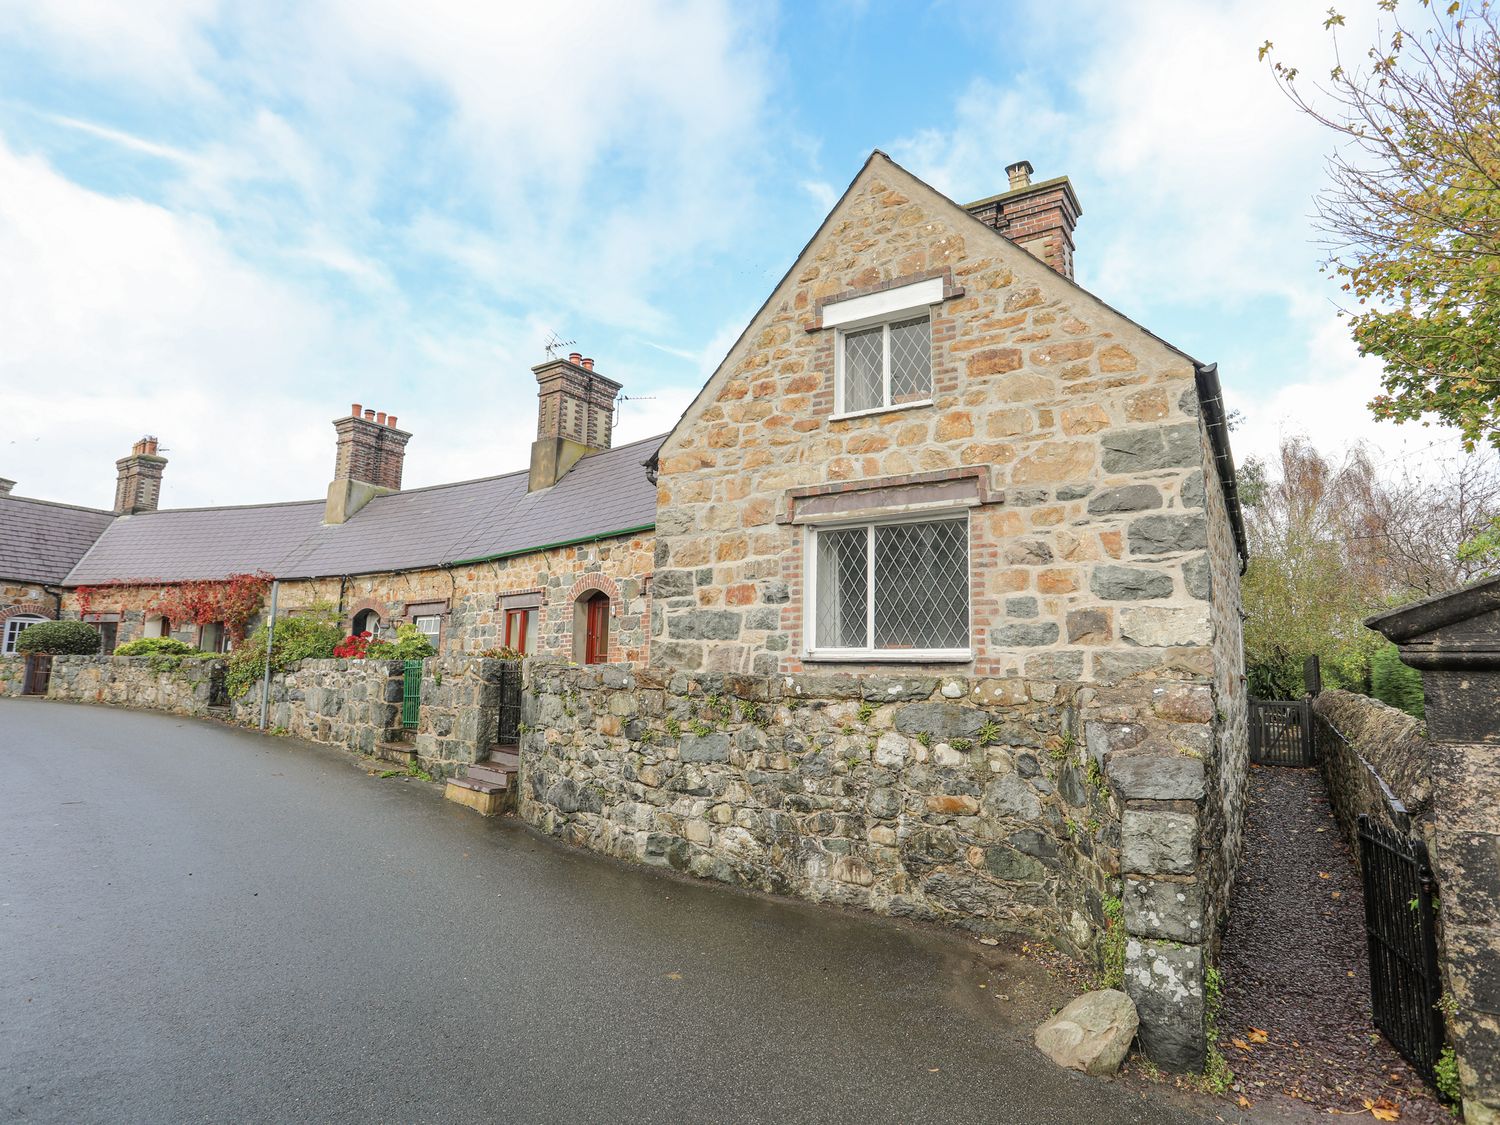 5 The Crescent - North Wales - 1144504 - photo 1